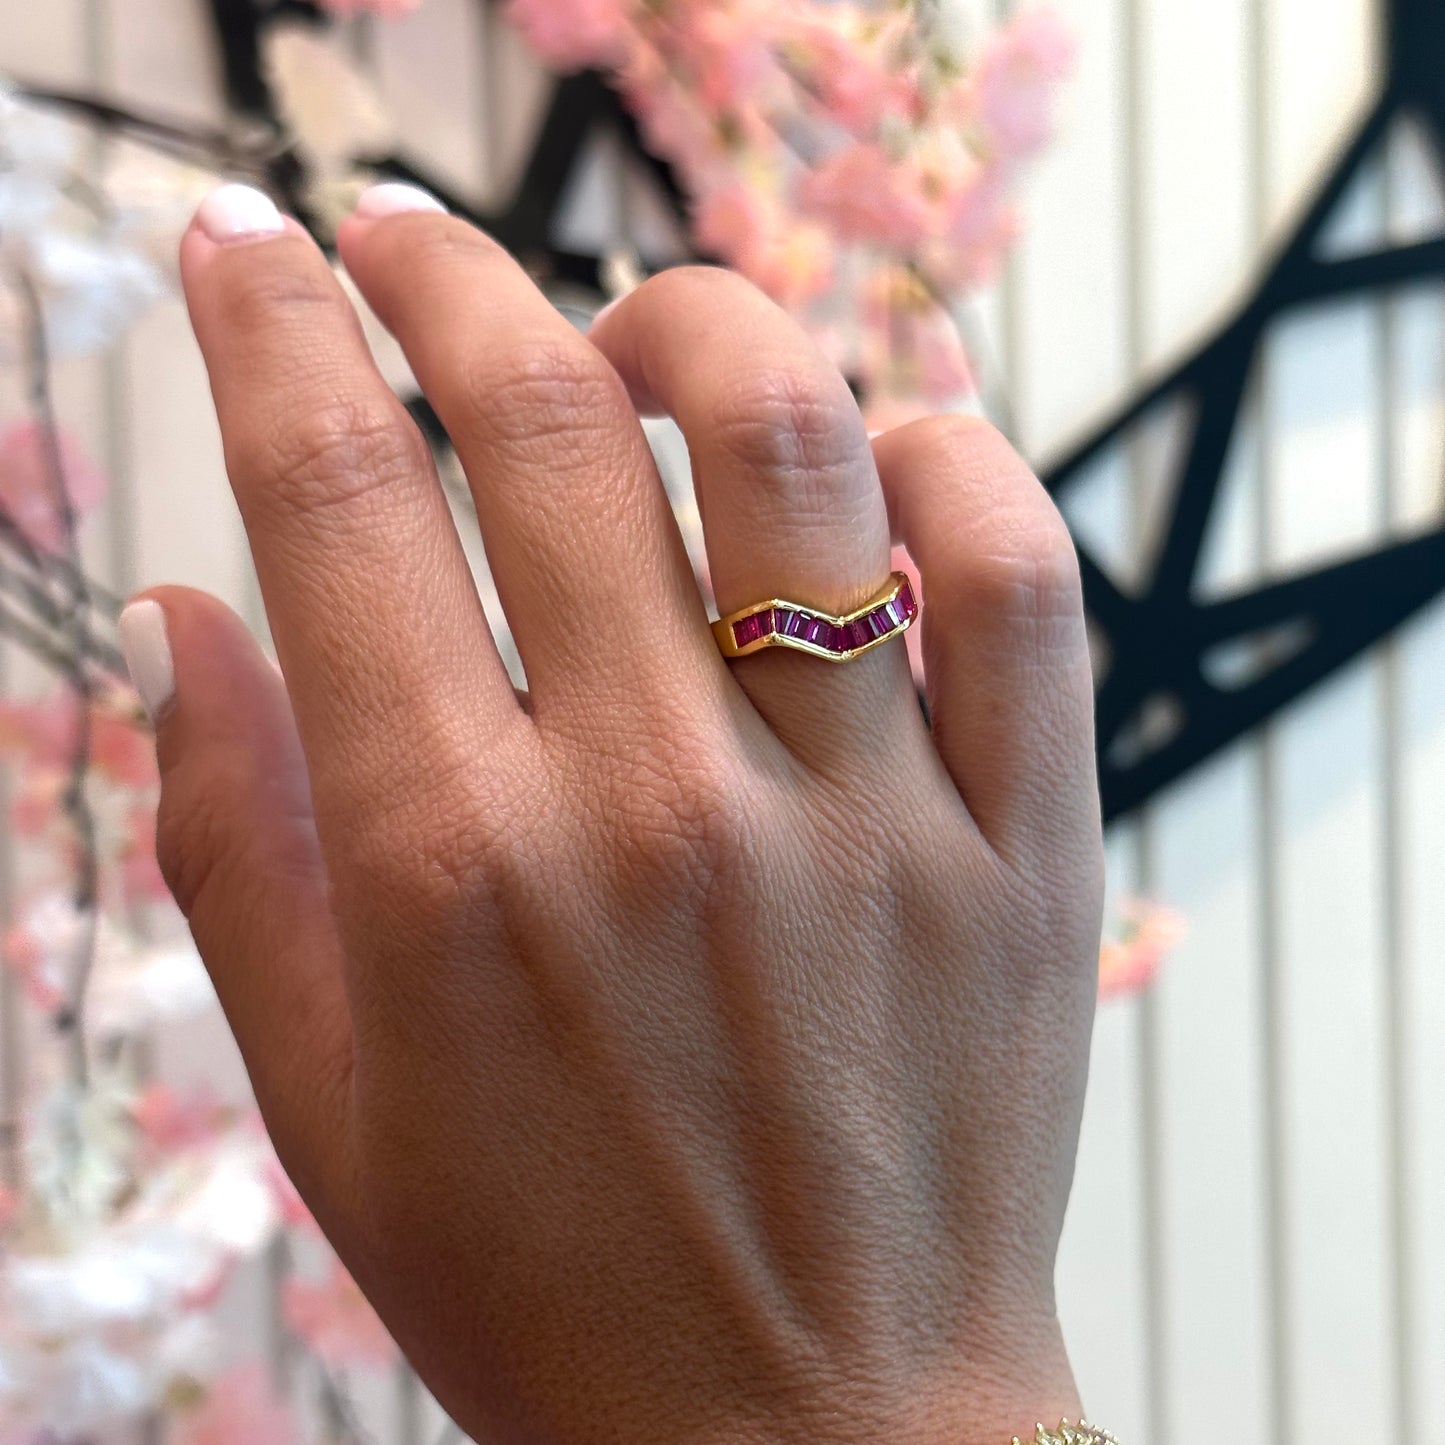 PINK UNIQUE RING | Fourfold 18K Gold Plated